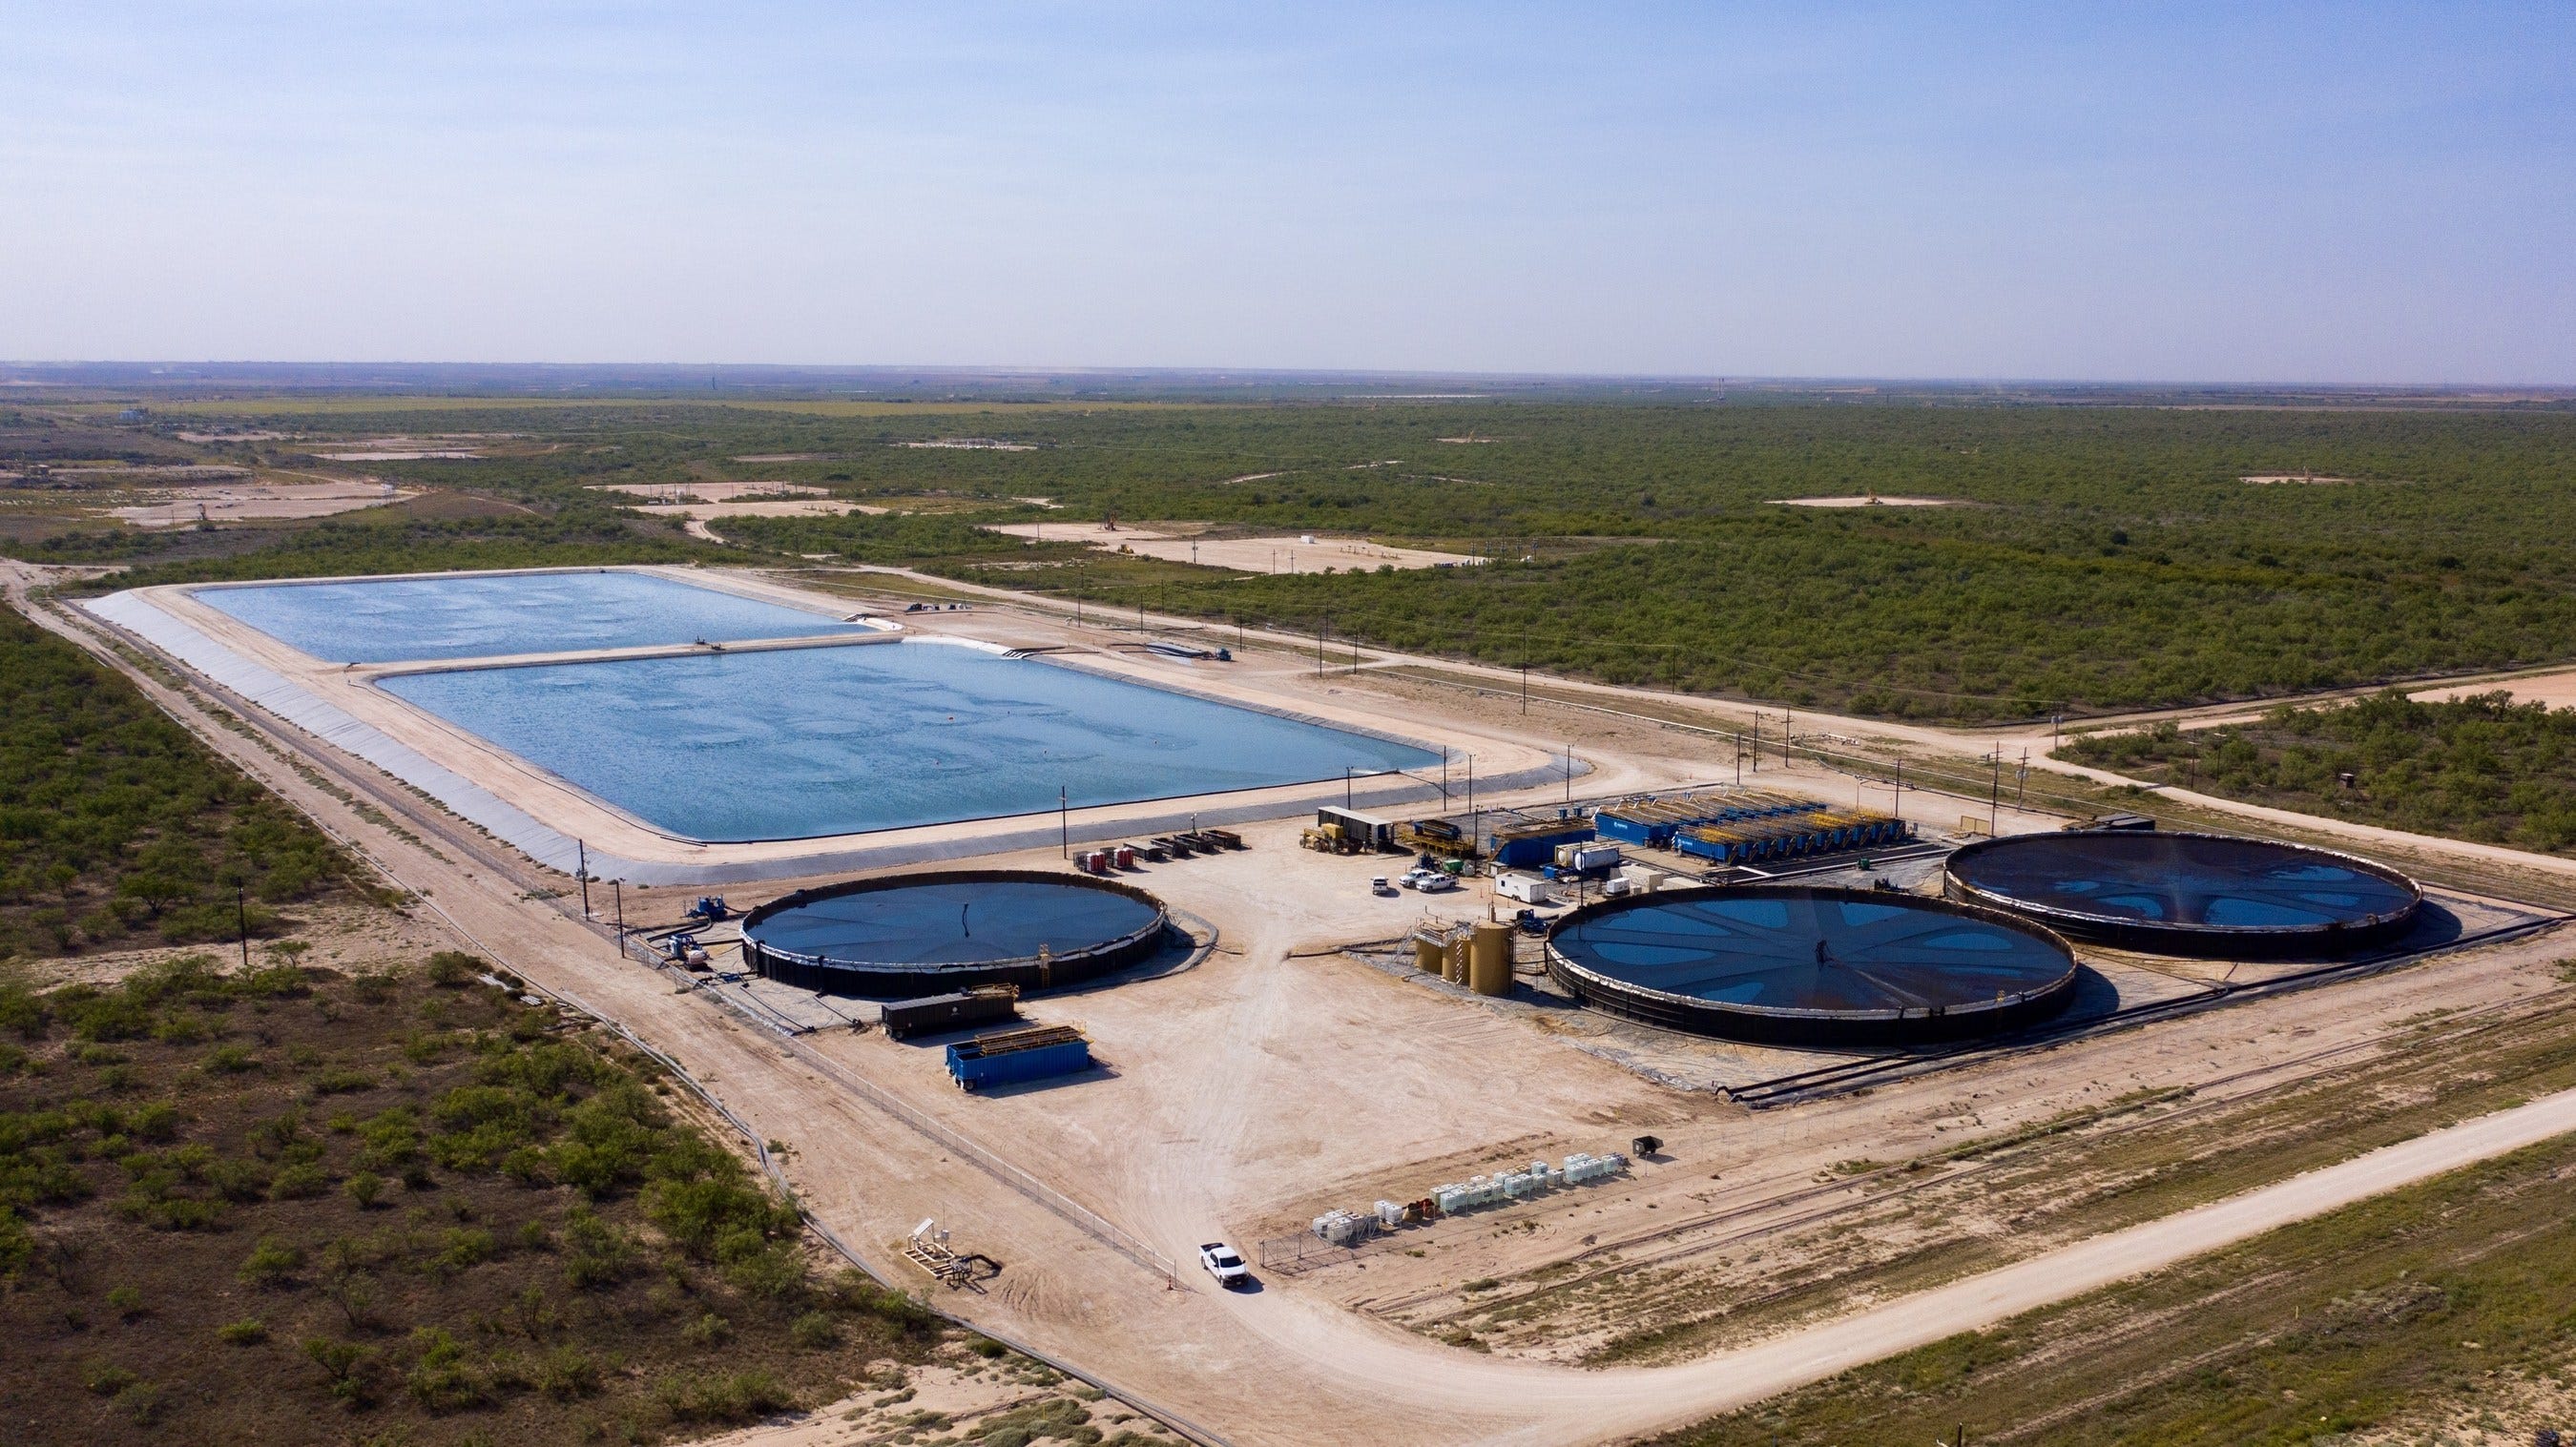 Oil and gas wastewater investments continue in Permian Basin